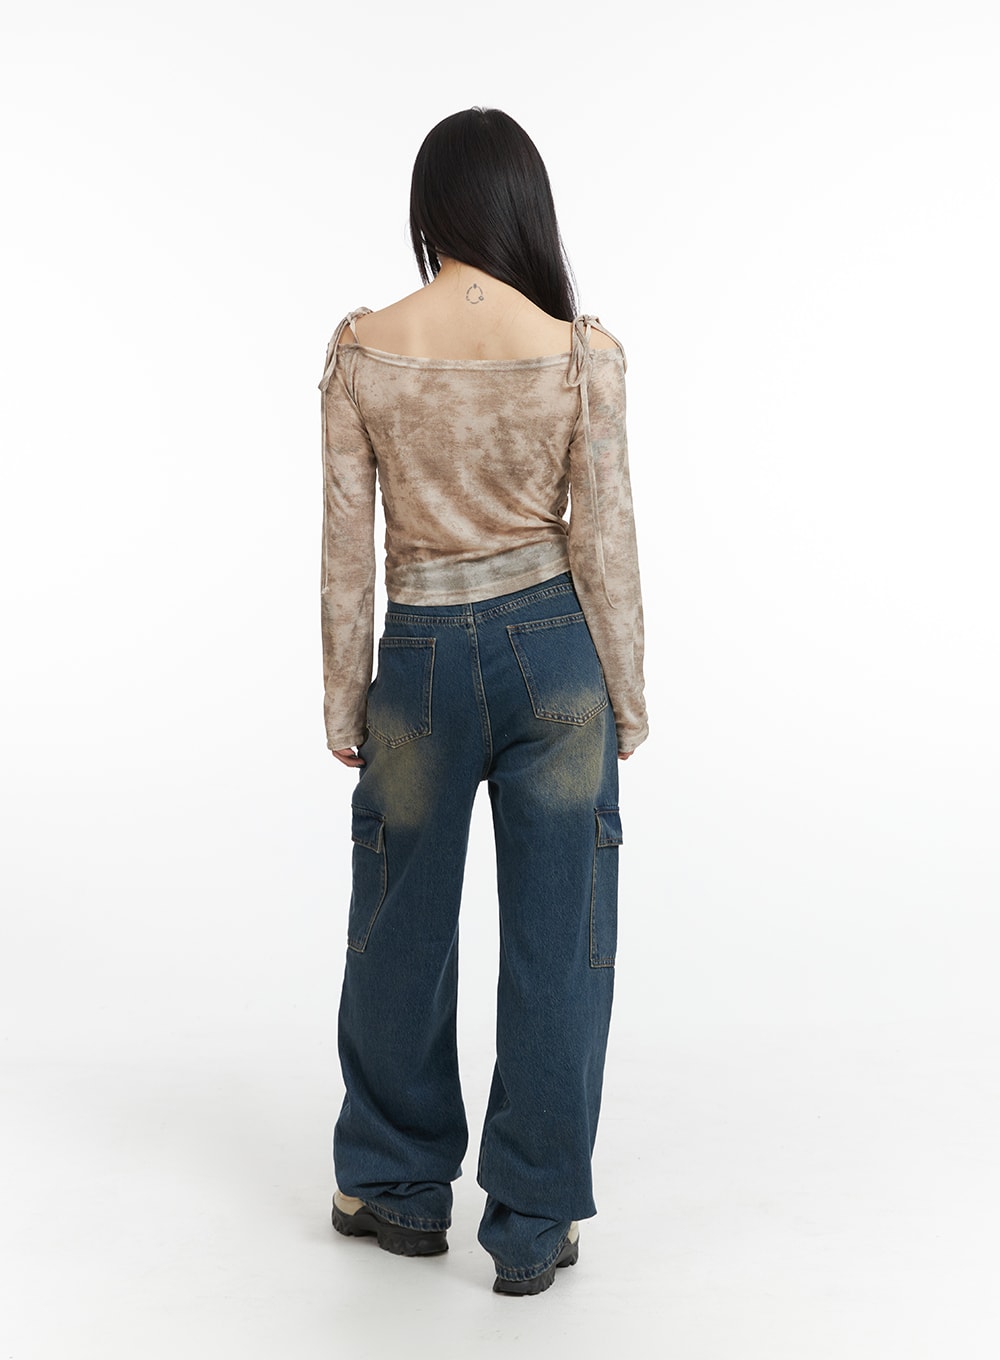 Haruku Style High Waist Denim Wide Leg Cargo Jeans With Elastic Pocket For  Women And Girls From Ltyy168, $40.11